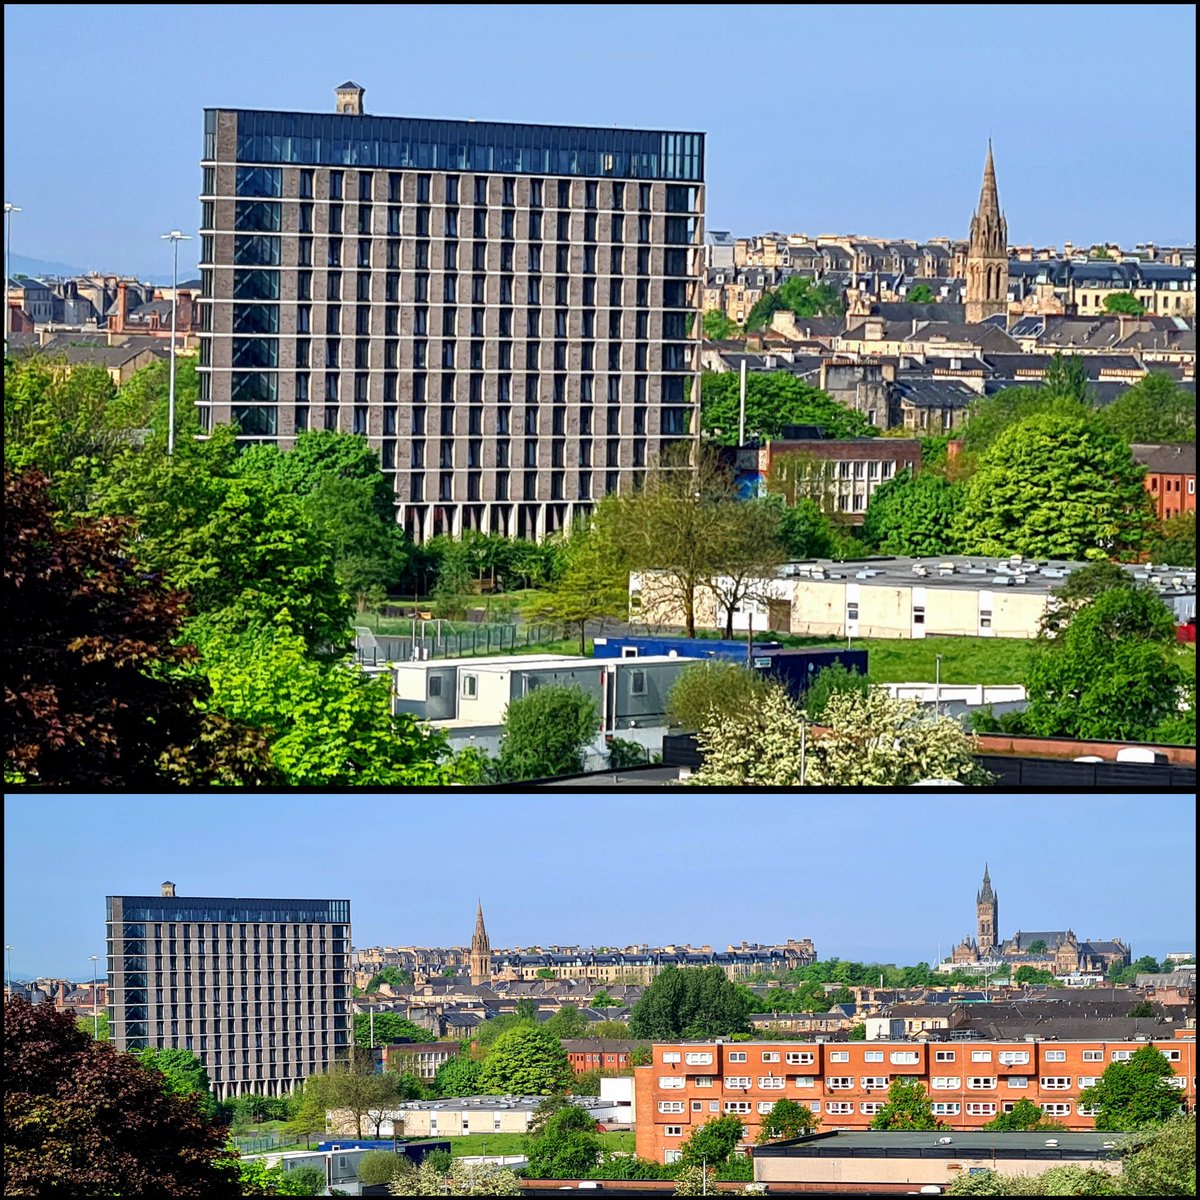 I would love to know how this new Purpose-Built Student Accommodation block on New City Road in Glasgow managed to get planning permission as it sticks out like a sore thumb and blots out views across the West End.

Cont./

#glasgow #architecture #urbanplanning #glasgowbuildings